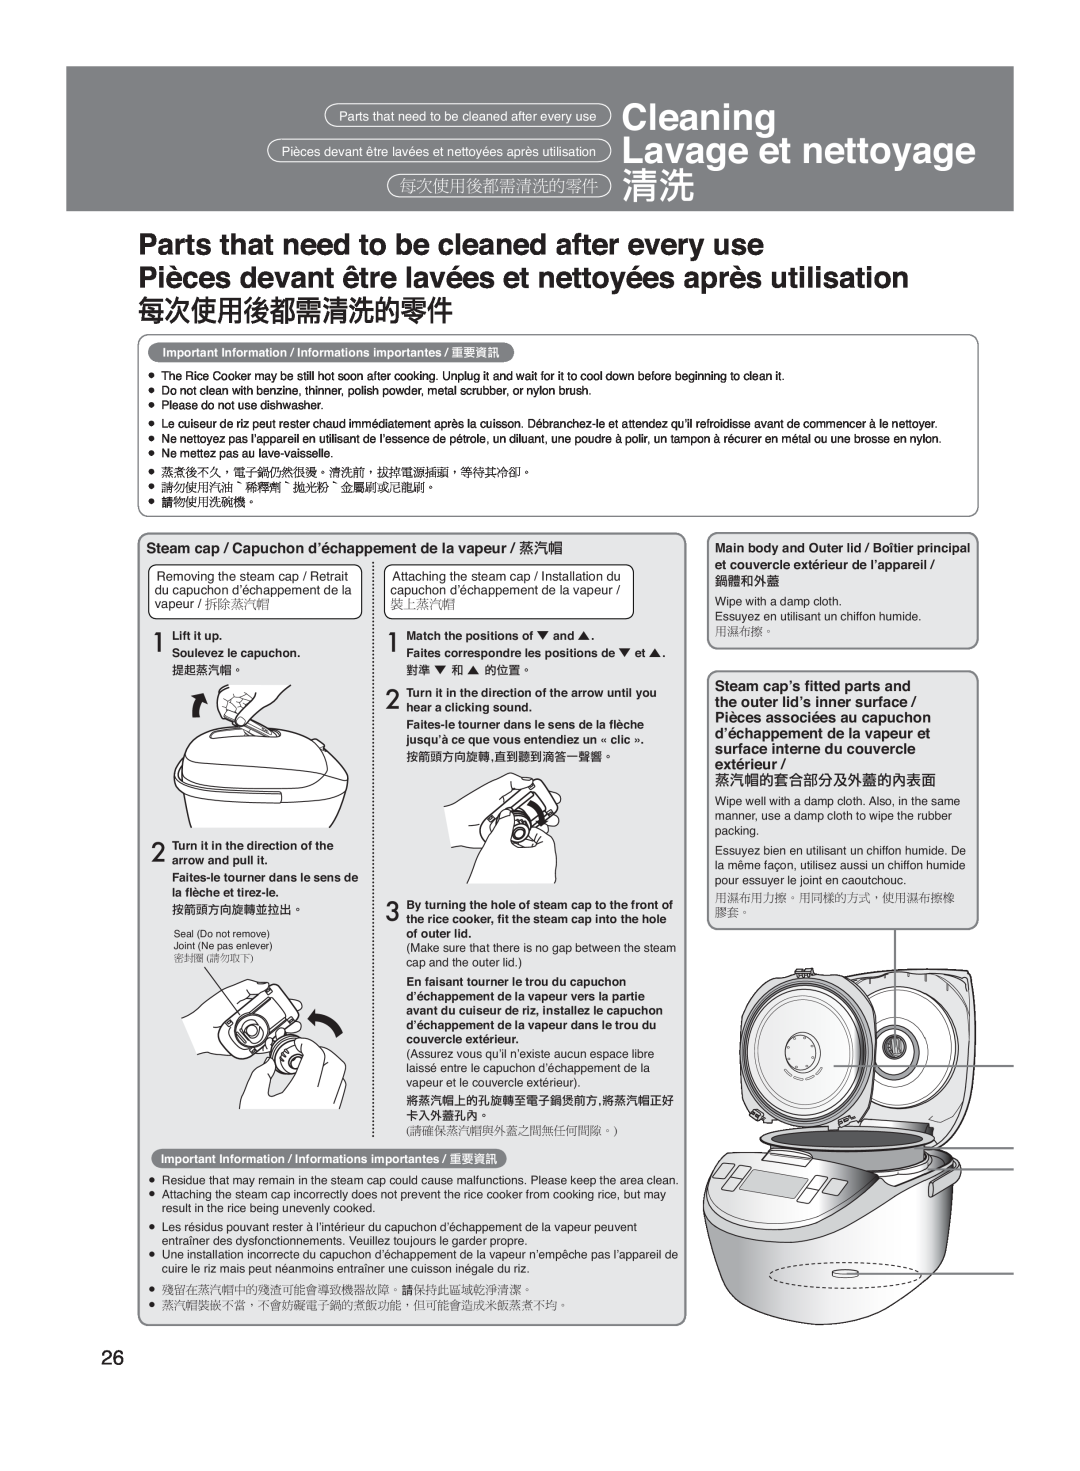 Panasonic SR-MS102, SR-MS182 manual Cleaning Lavage et nettoyage, Parts that need to be cleaned after every use,   